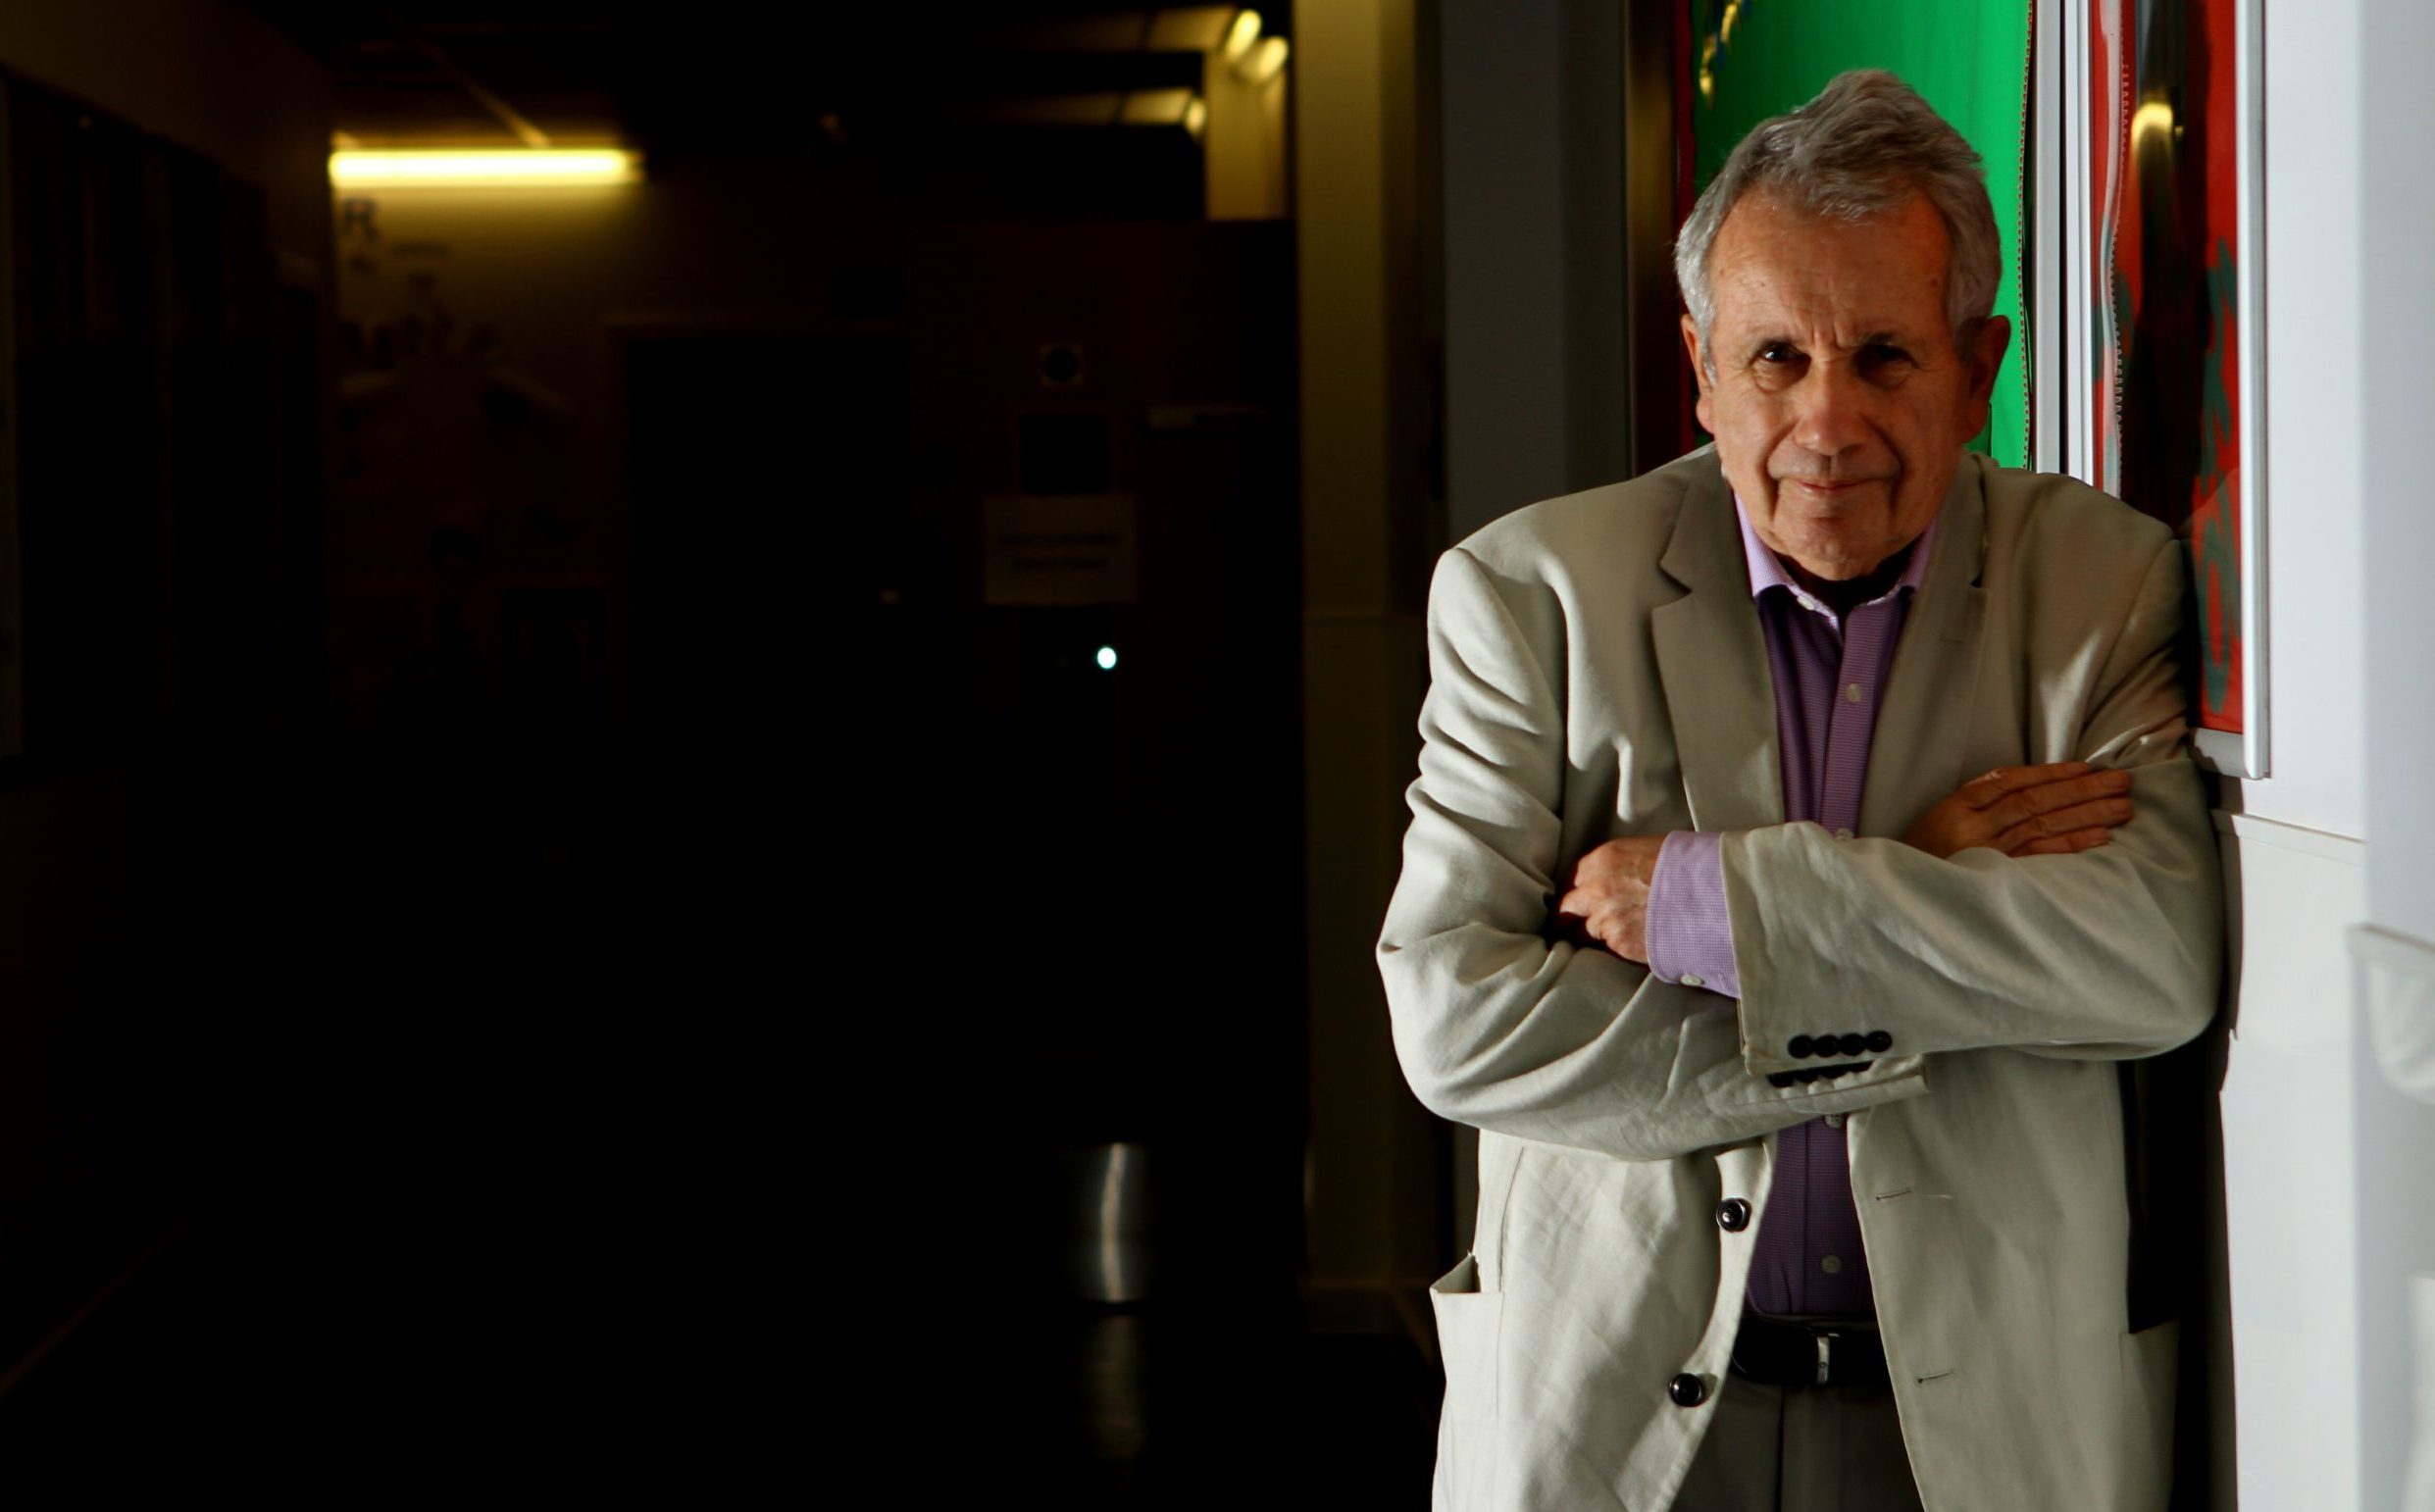 Martin Bell during an appearance at Bookmark in 2017